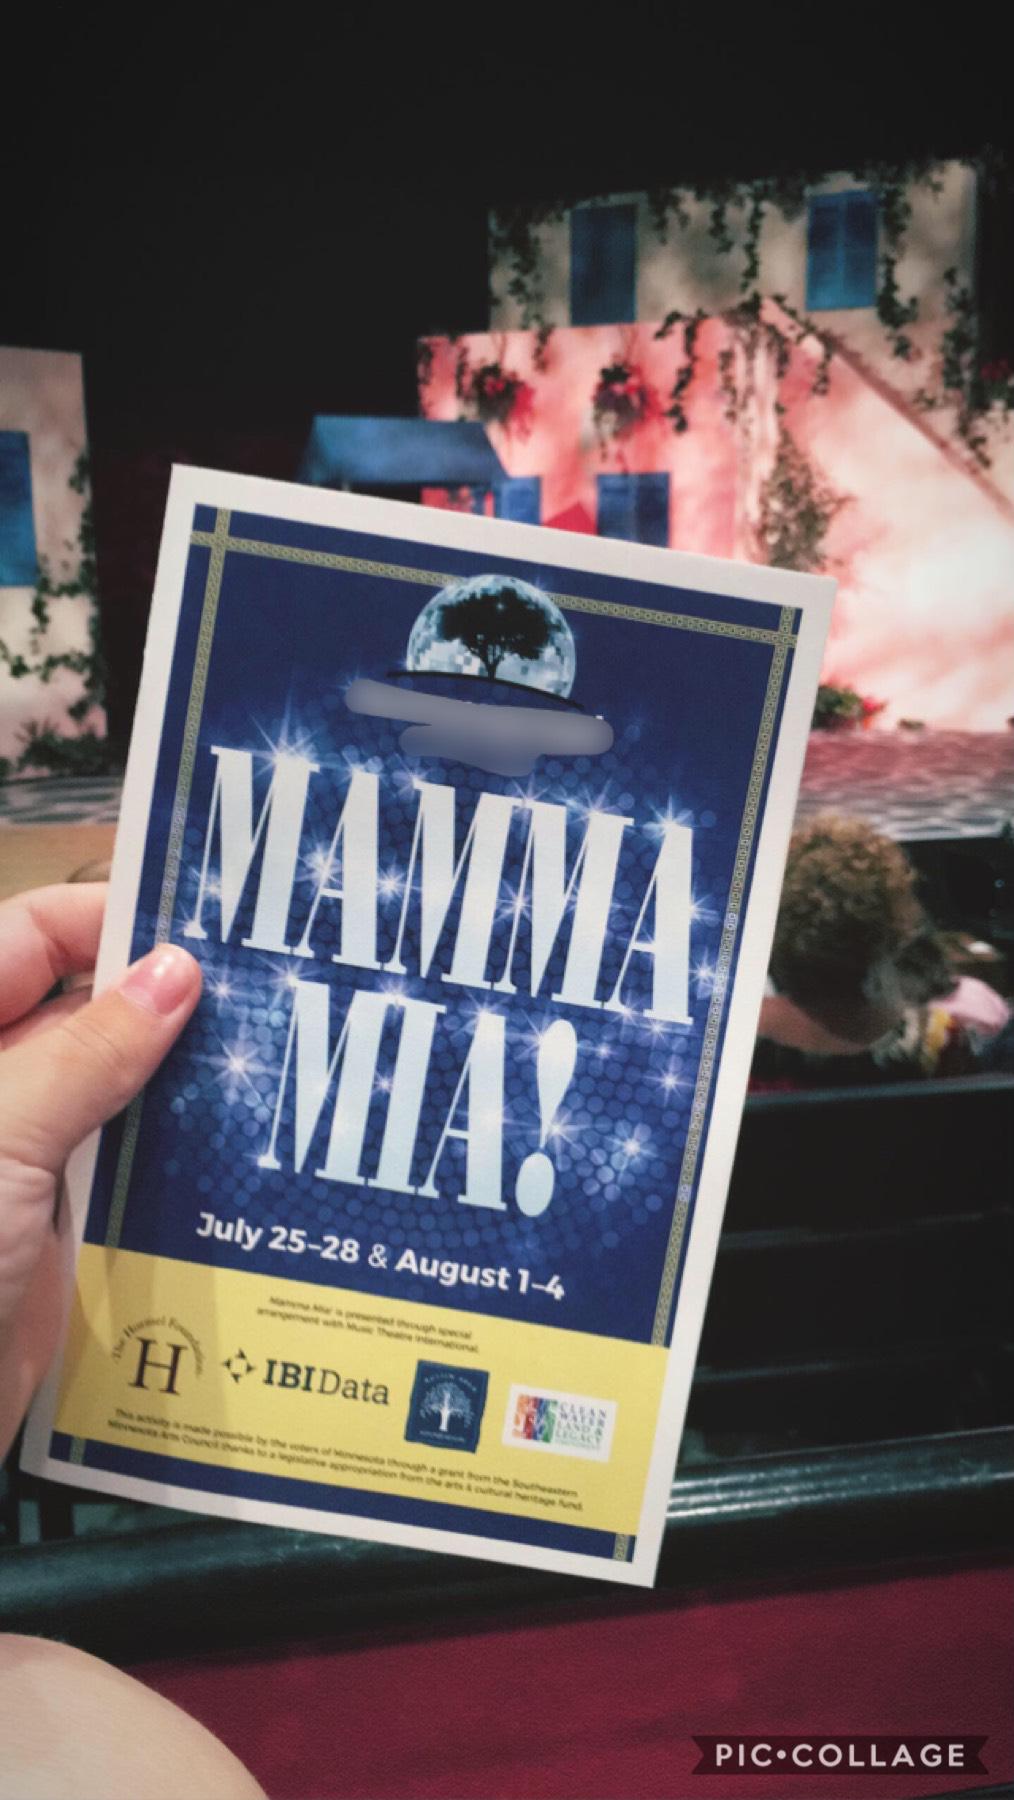 I just saw Mamma Mia!!!
(In the town I was born in :))
It was SO FUN!!
There were a couple cute guys and a couple cute girls in it hehe
Actually one of them was my dad’s friend’s son
So
